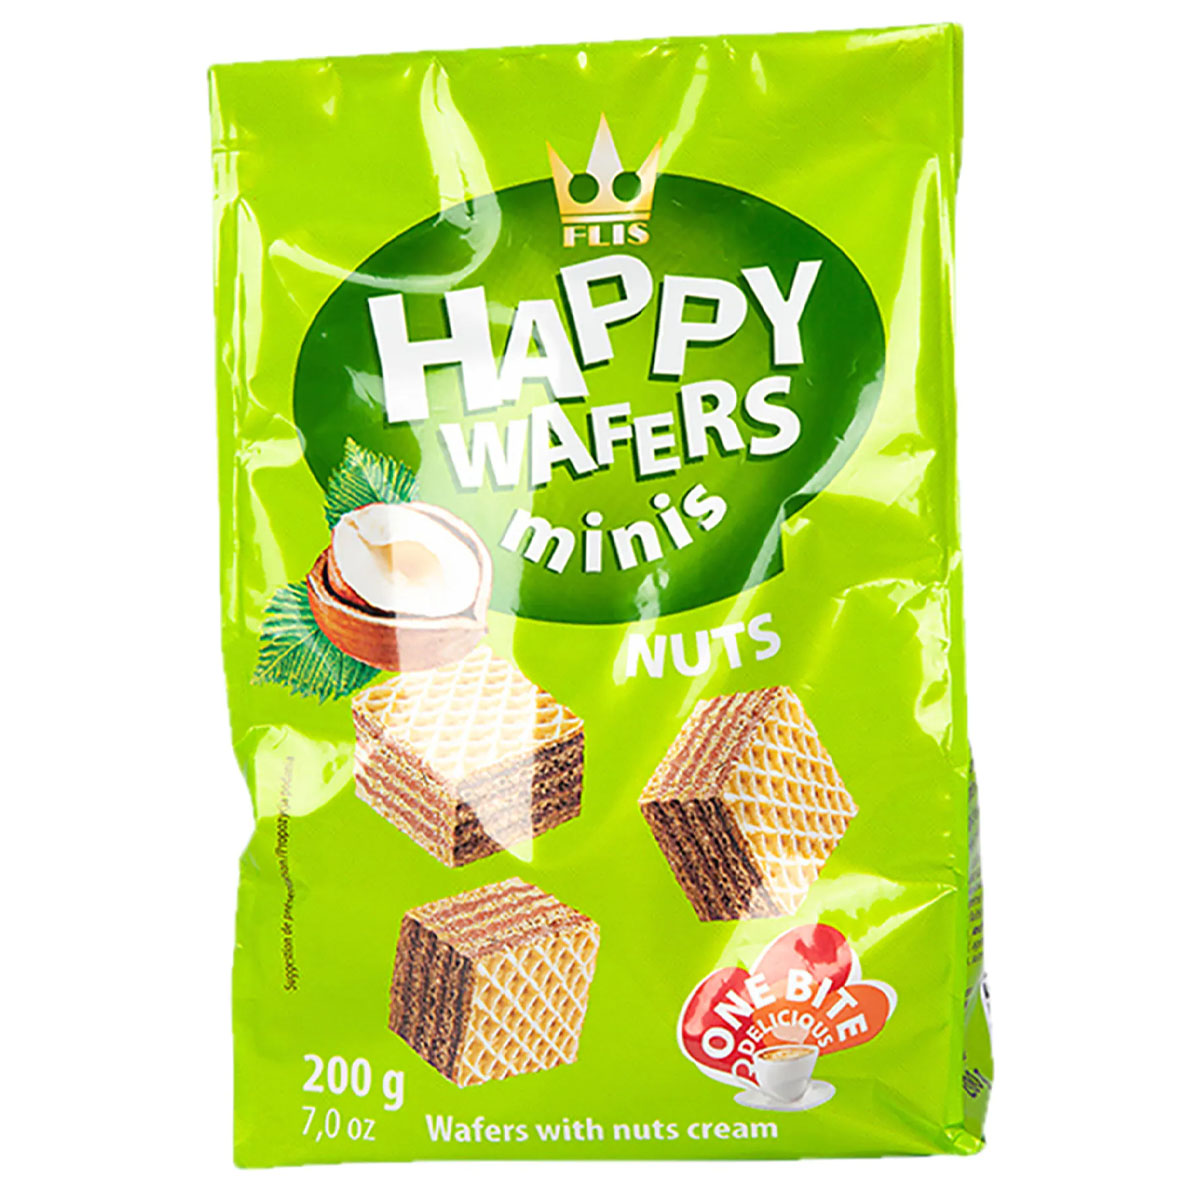 Flis - Happy Wafers Minis - 200g - Continental Food Store